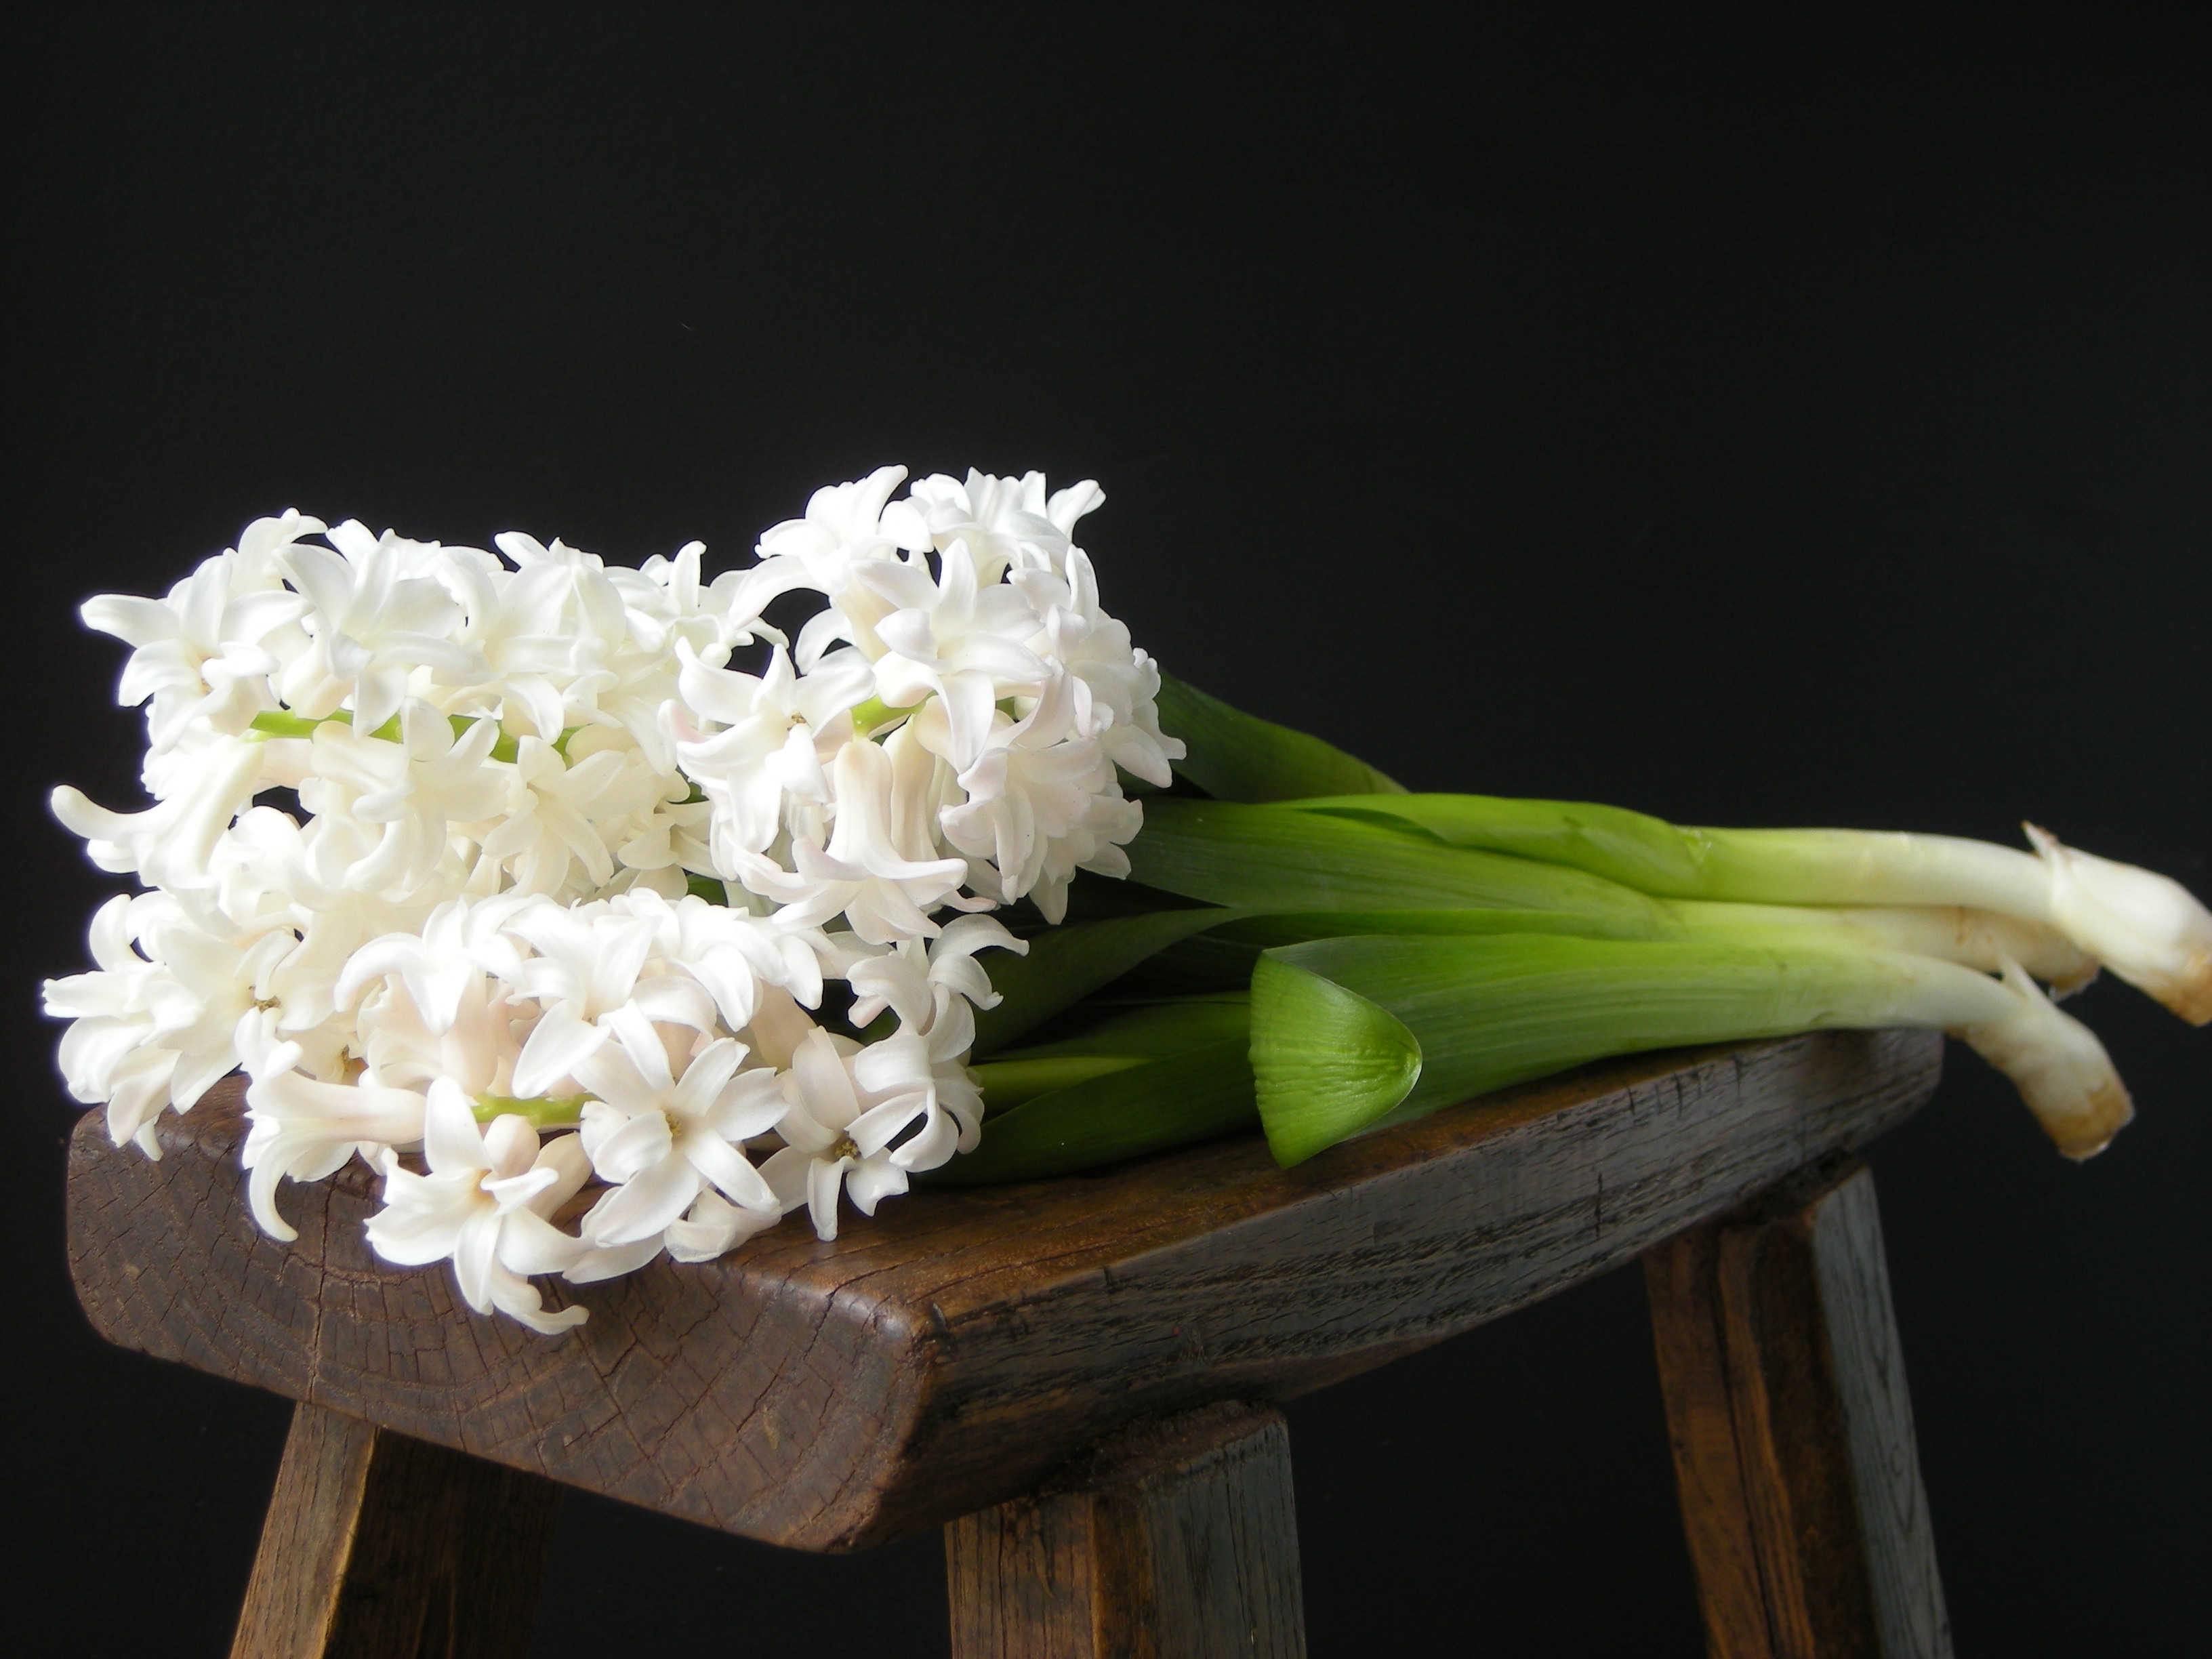 Hyacinth in Focus - floriography